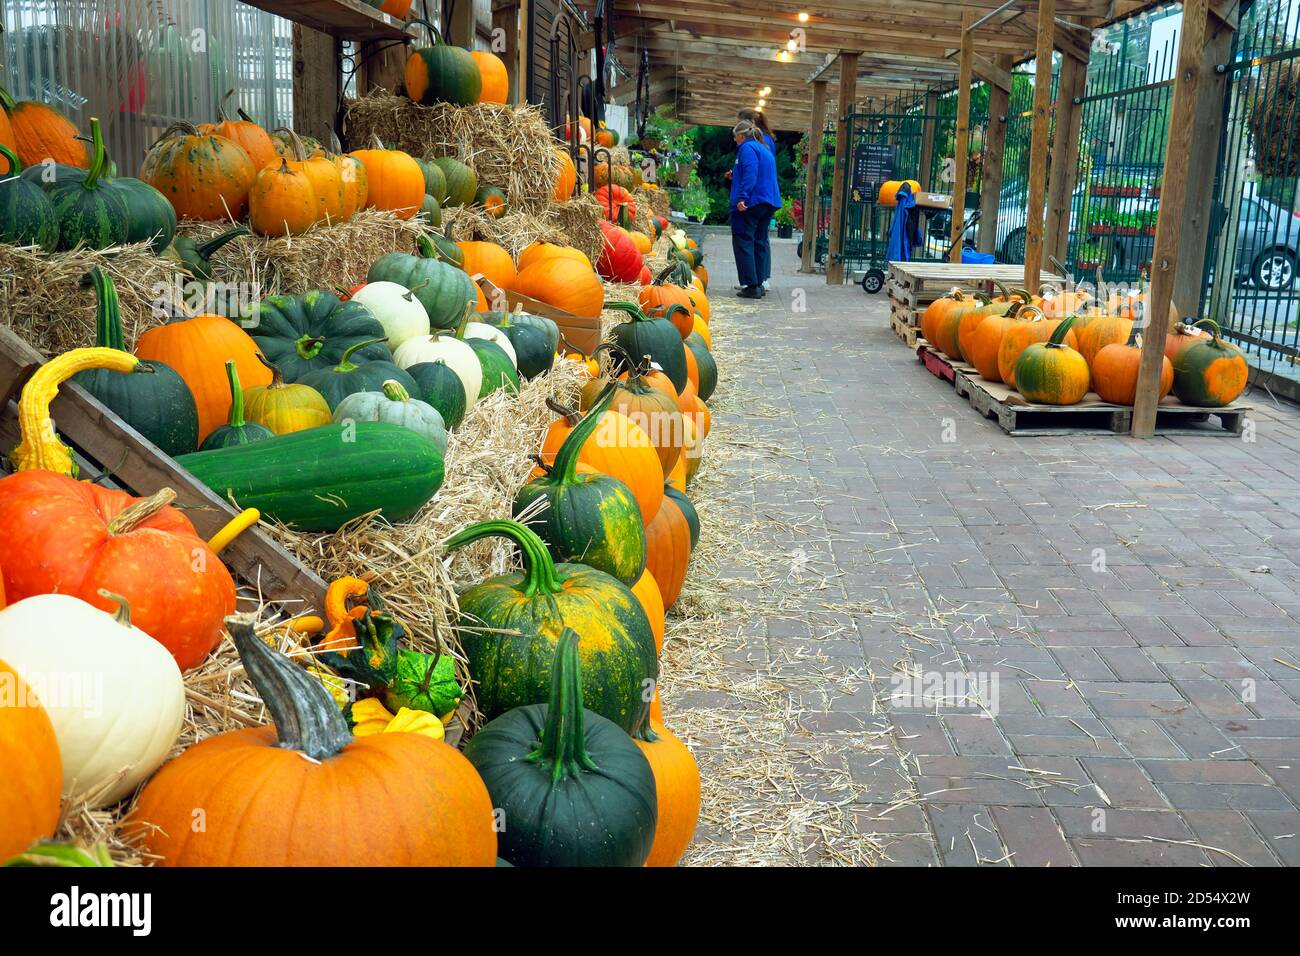 A wall of freshly harvested pumpkins on bales of straw undercover at a local market.  People in the background. Stock Photo